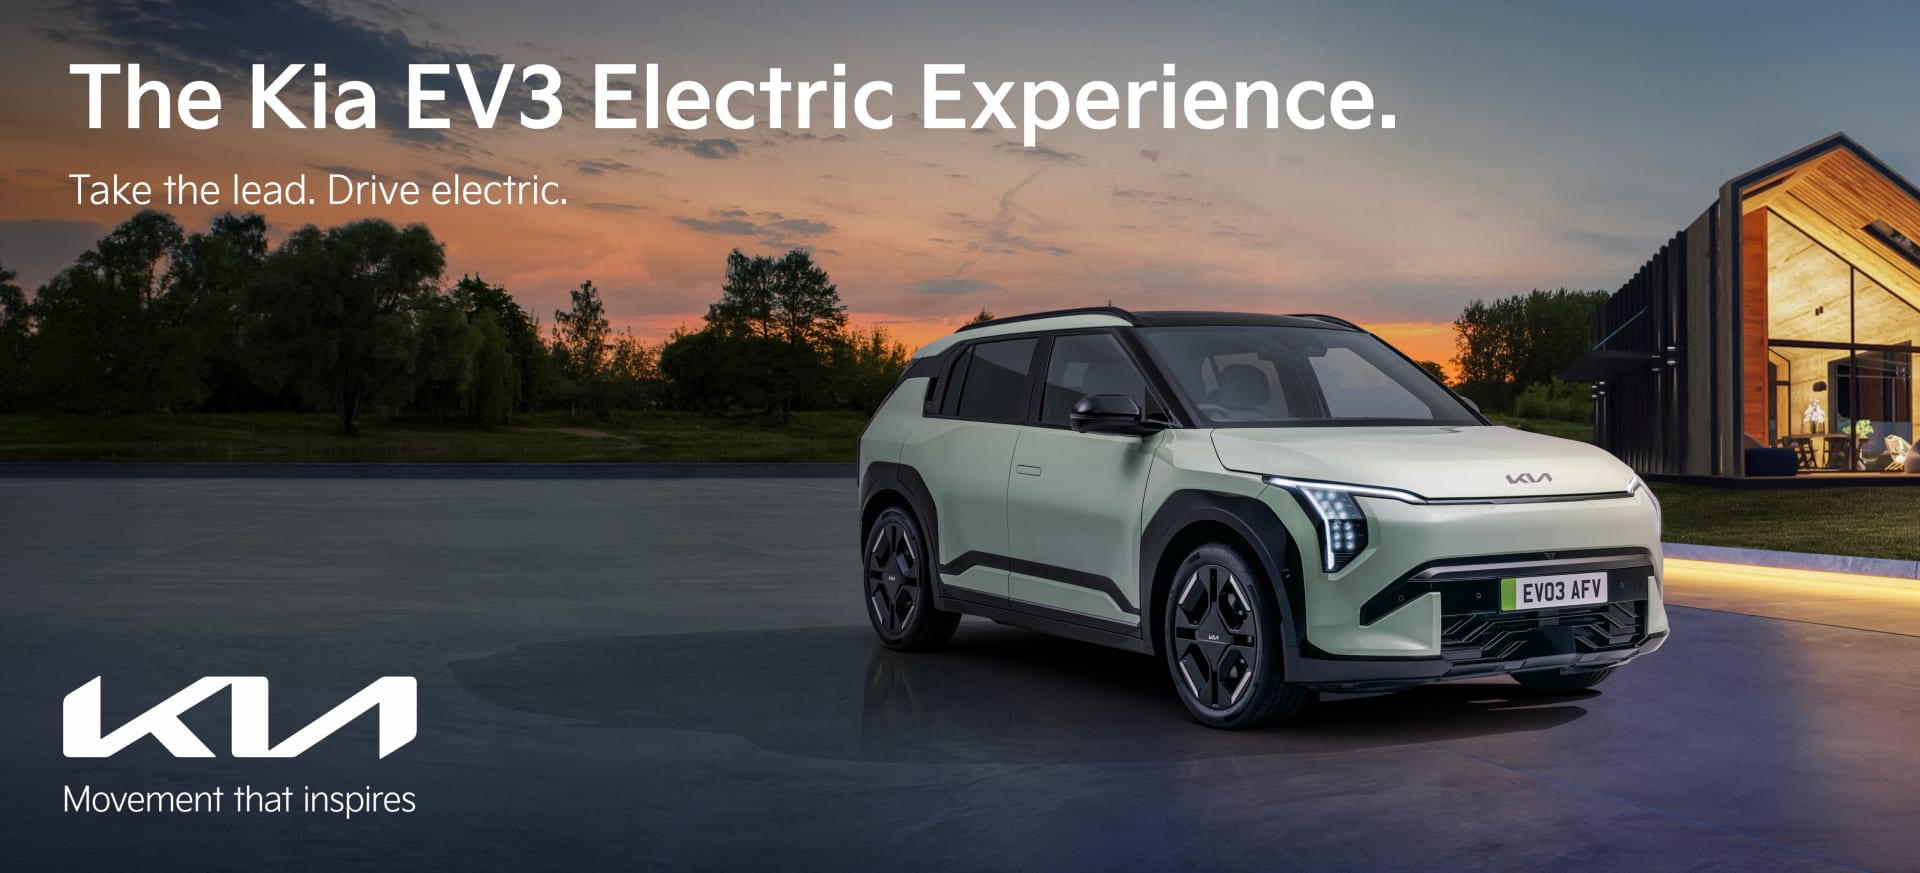 Be one of the first to see the new compact electric SUV.